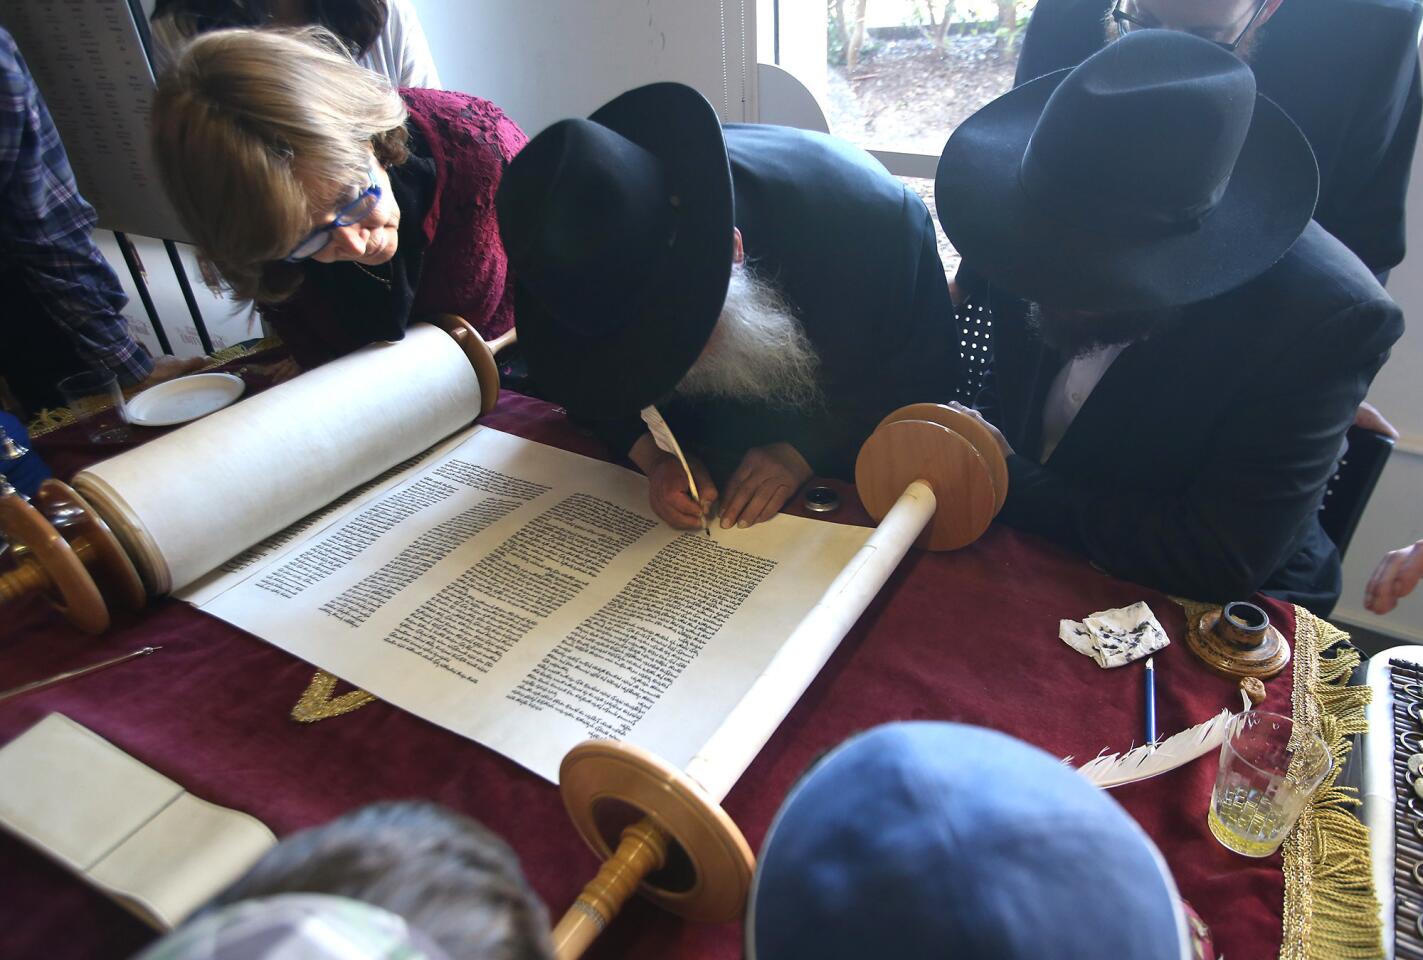 Special guest Leibel Groner of New York writes the final letters on UC Irvine's Unity Torah during a ceremony Monday at the university's Cross Cultural Center. Groner is the grandfather of Zevi Tenenbaum, the campus rabbi. The Torah will be placed at the Rohr Chabad at UCI.